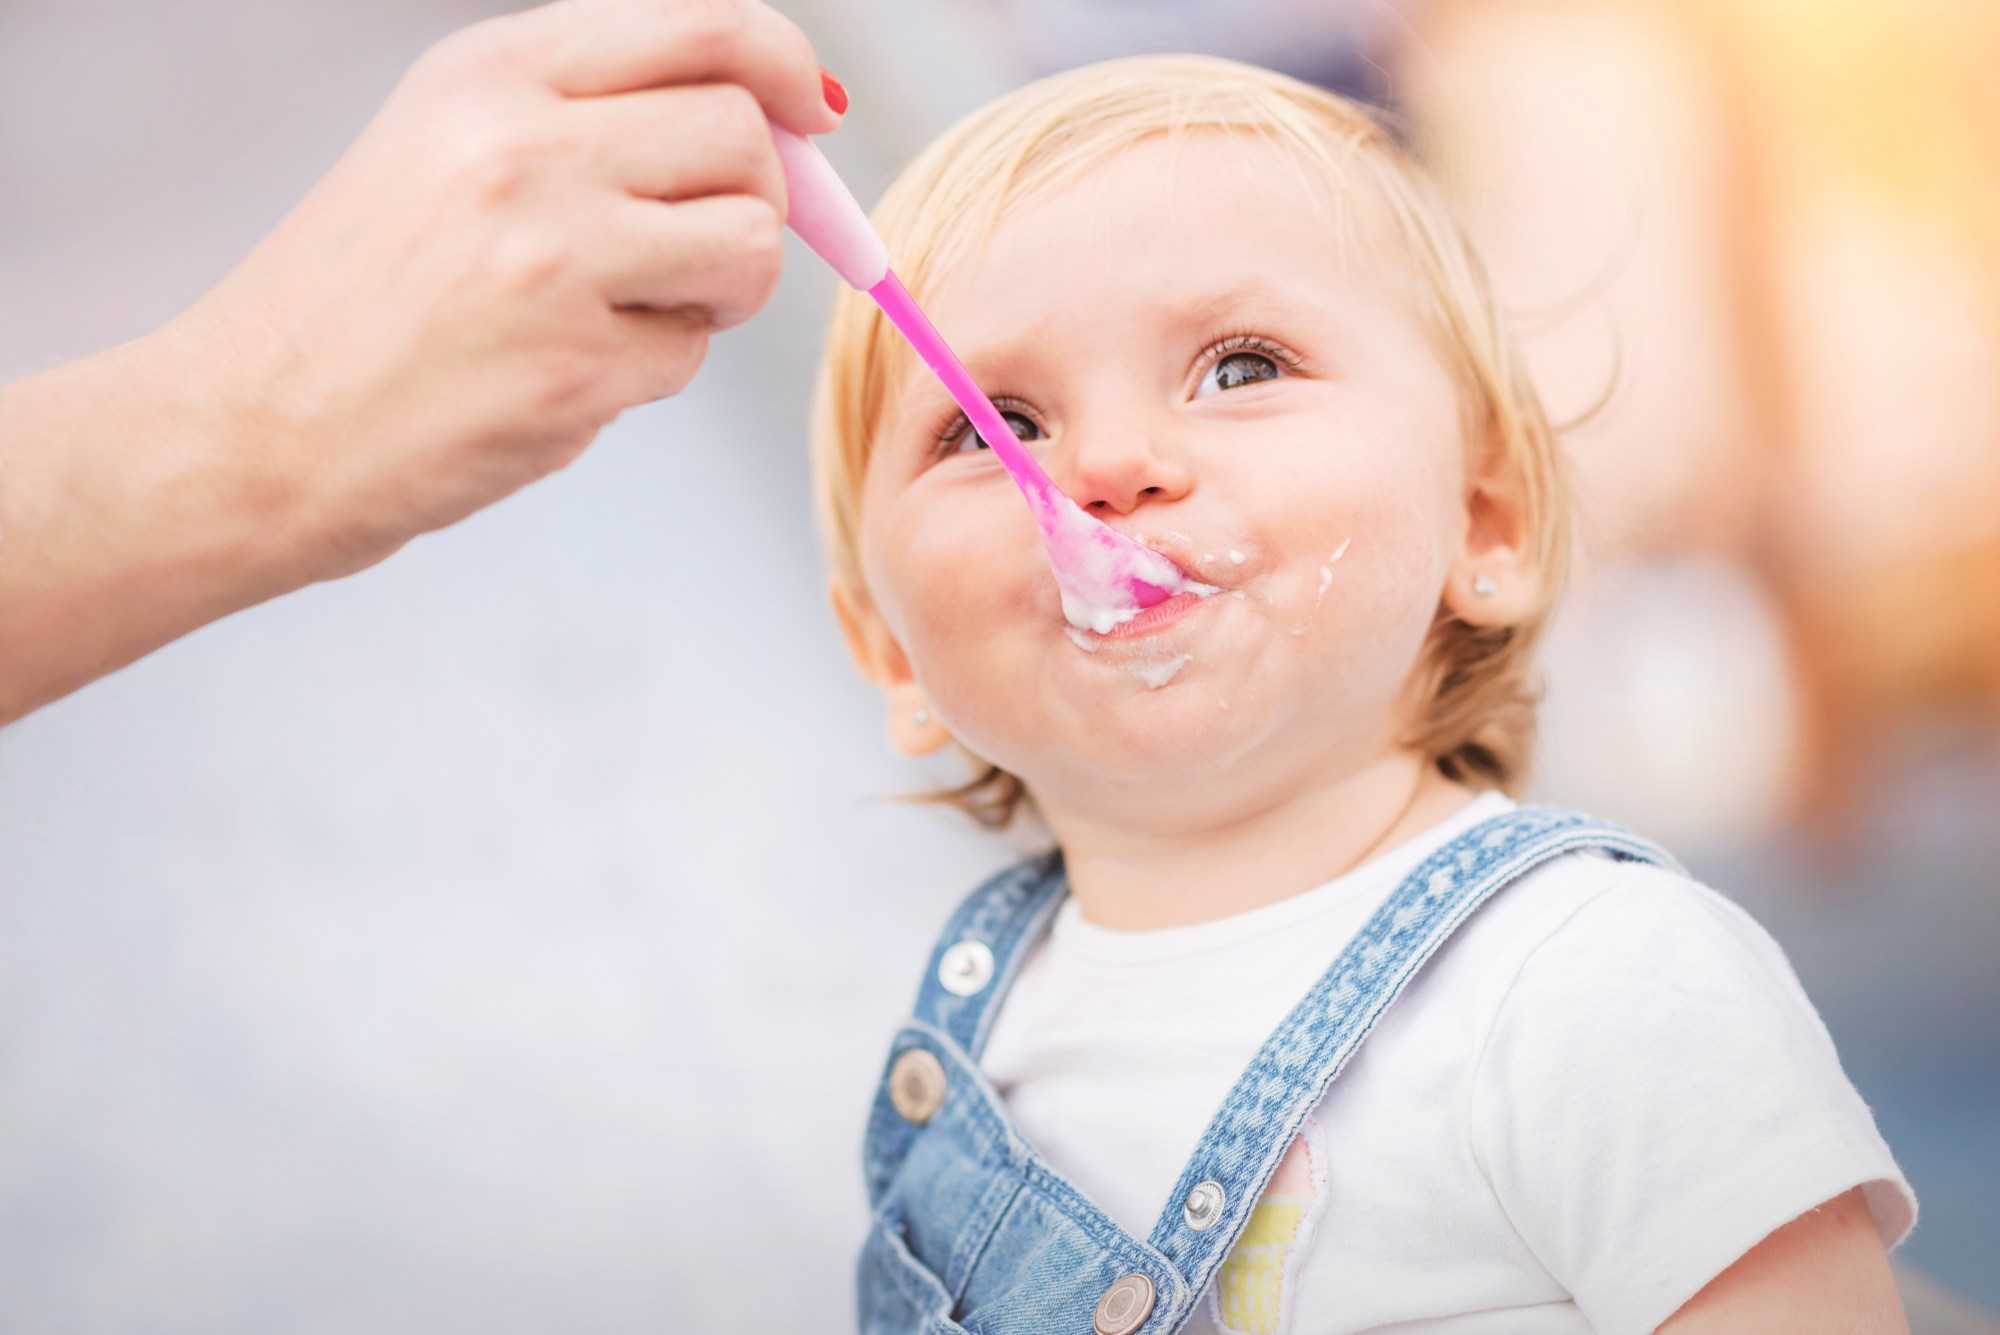 Child eating yogurt from a spoon